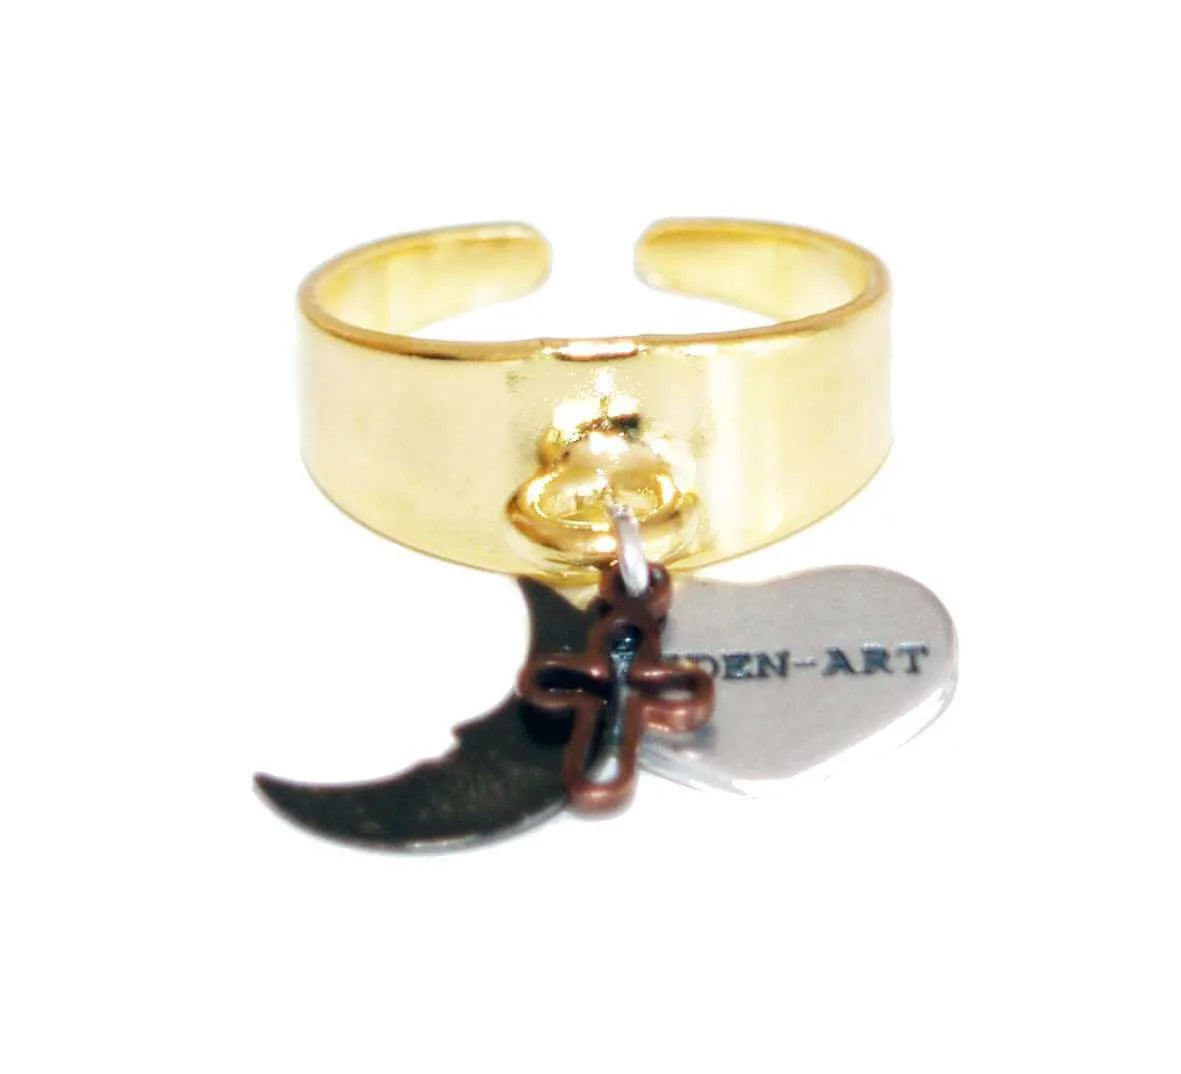 Statement ring in gold with black moon charm and cross - Maiden-Art